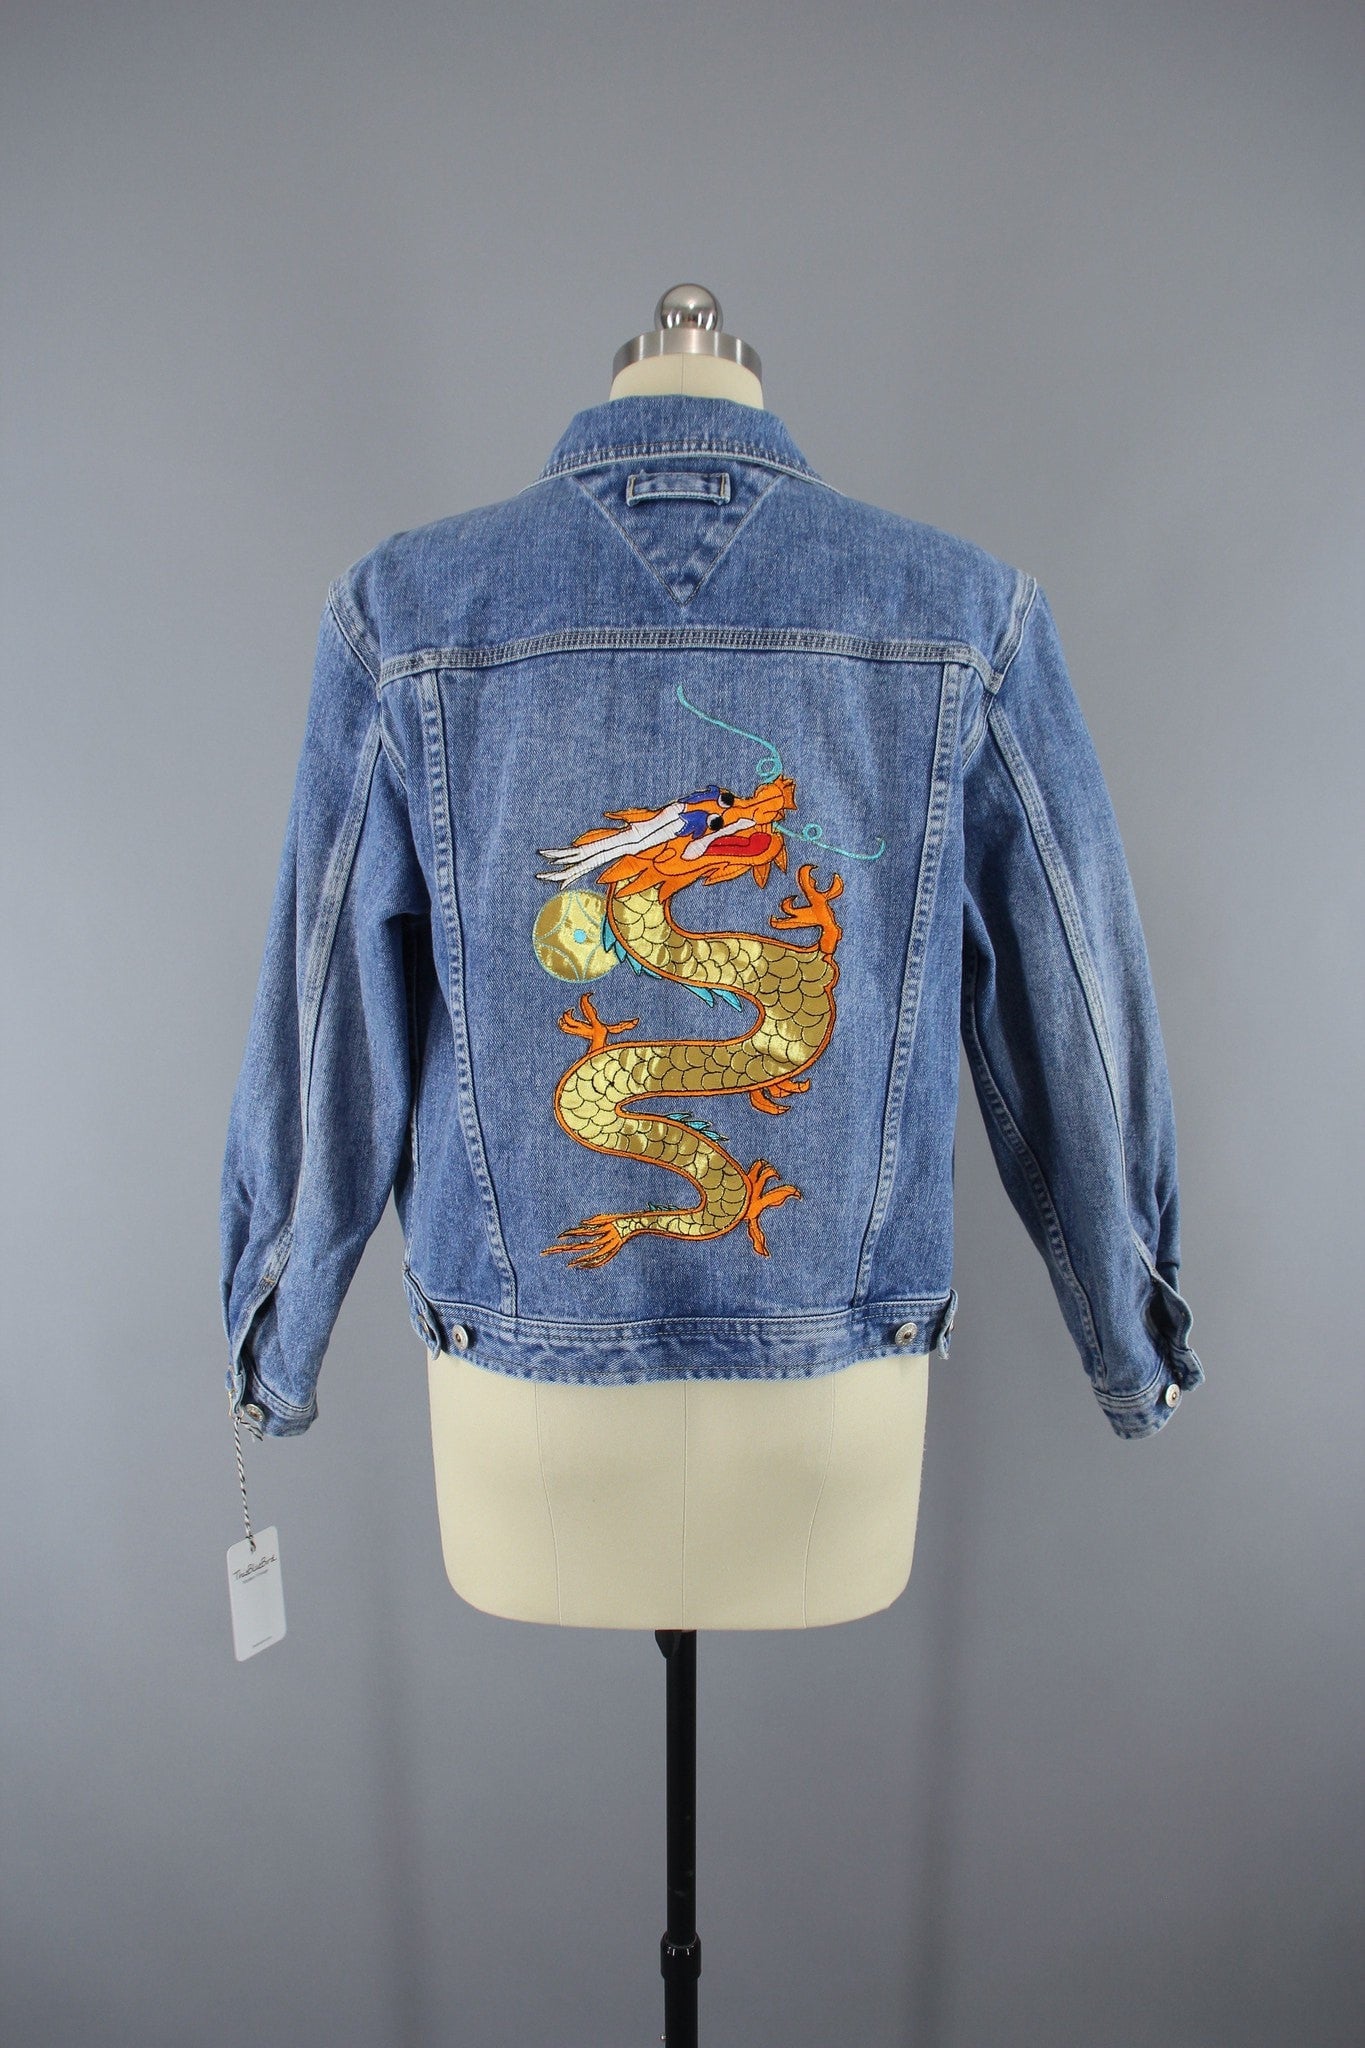 Denim Jean Jacket with Golden Dragon Embroidered Patch - ThisBlueBird